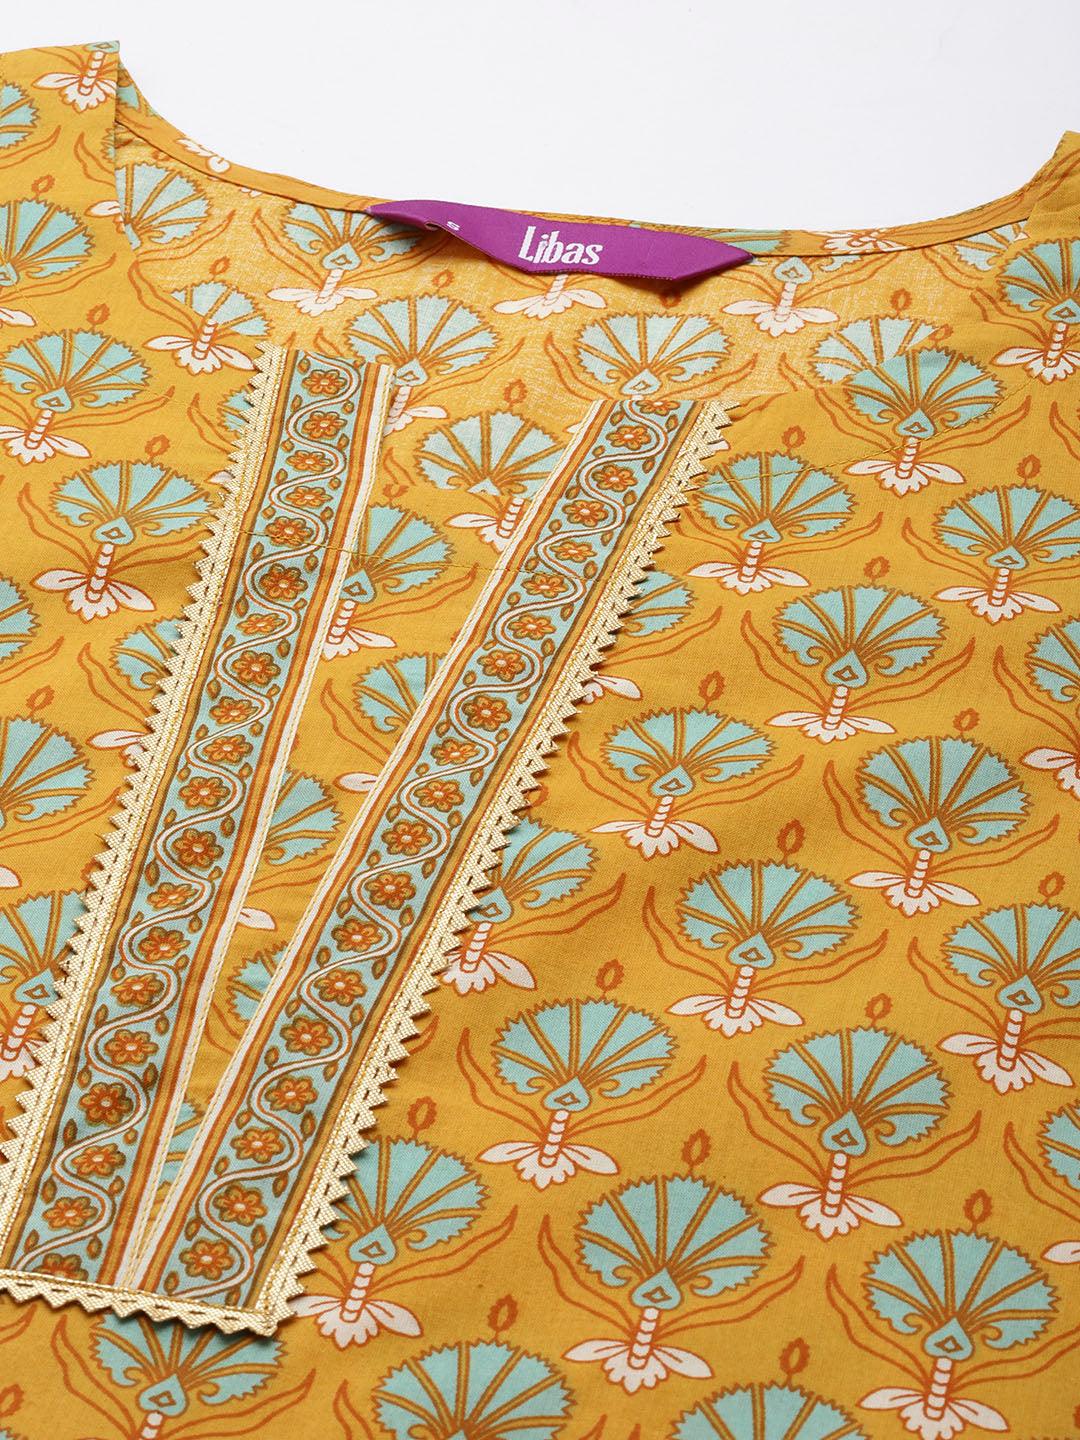 Yellow Printed Cotton Straight Kurta With Trousers